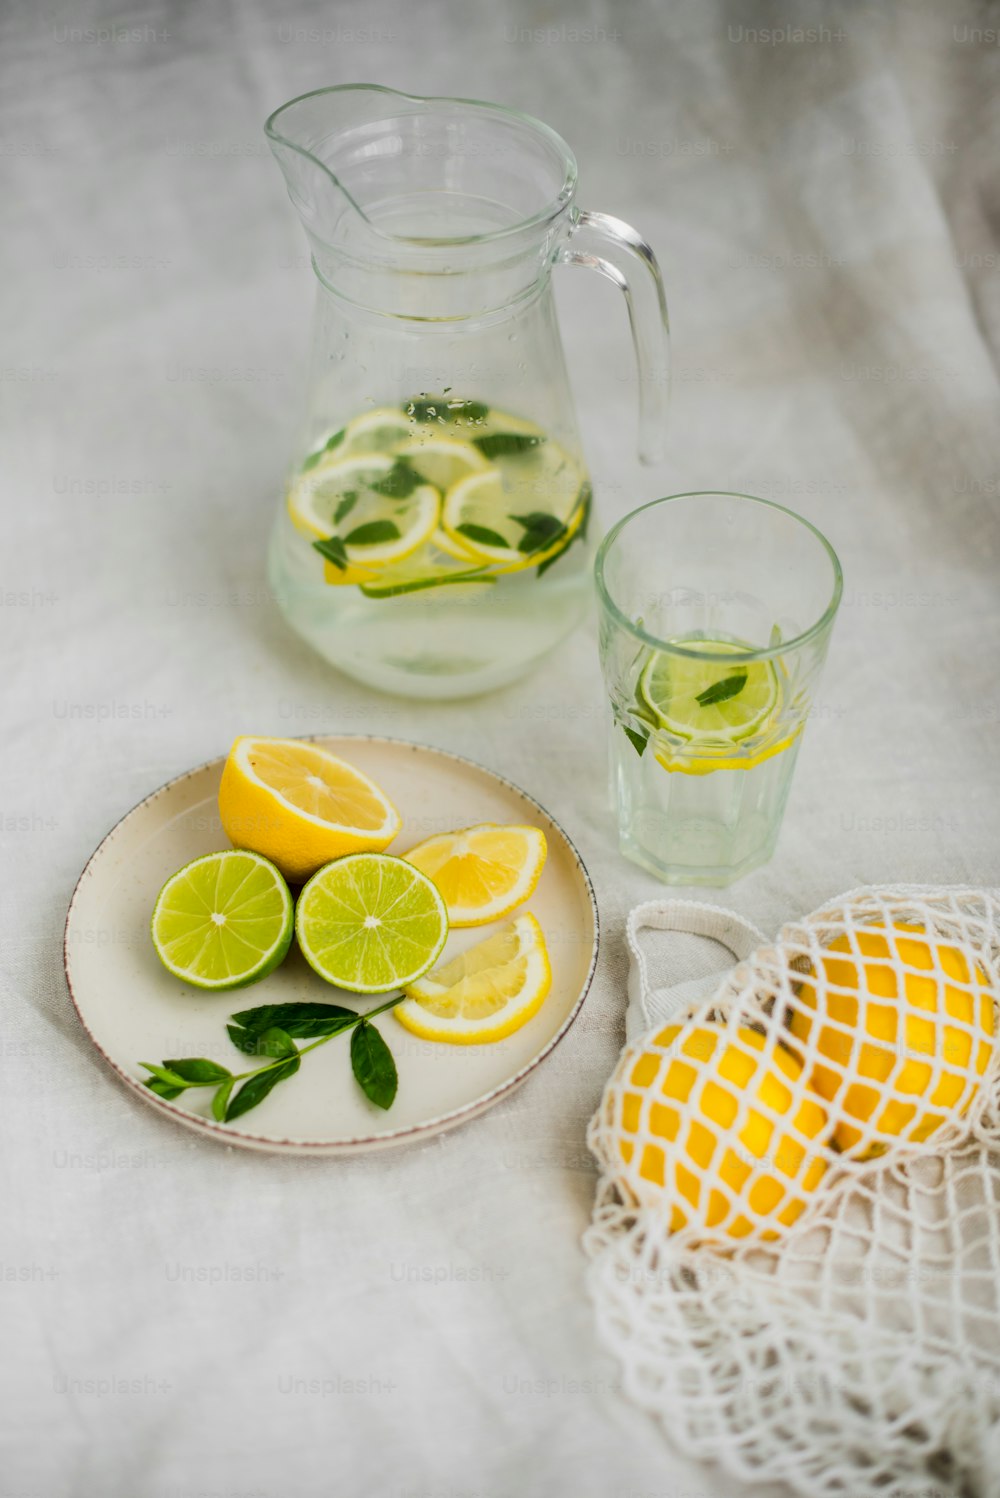 a plate of lemons and limes next to a pitcher of water